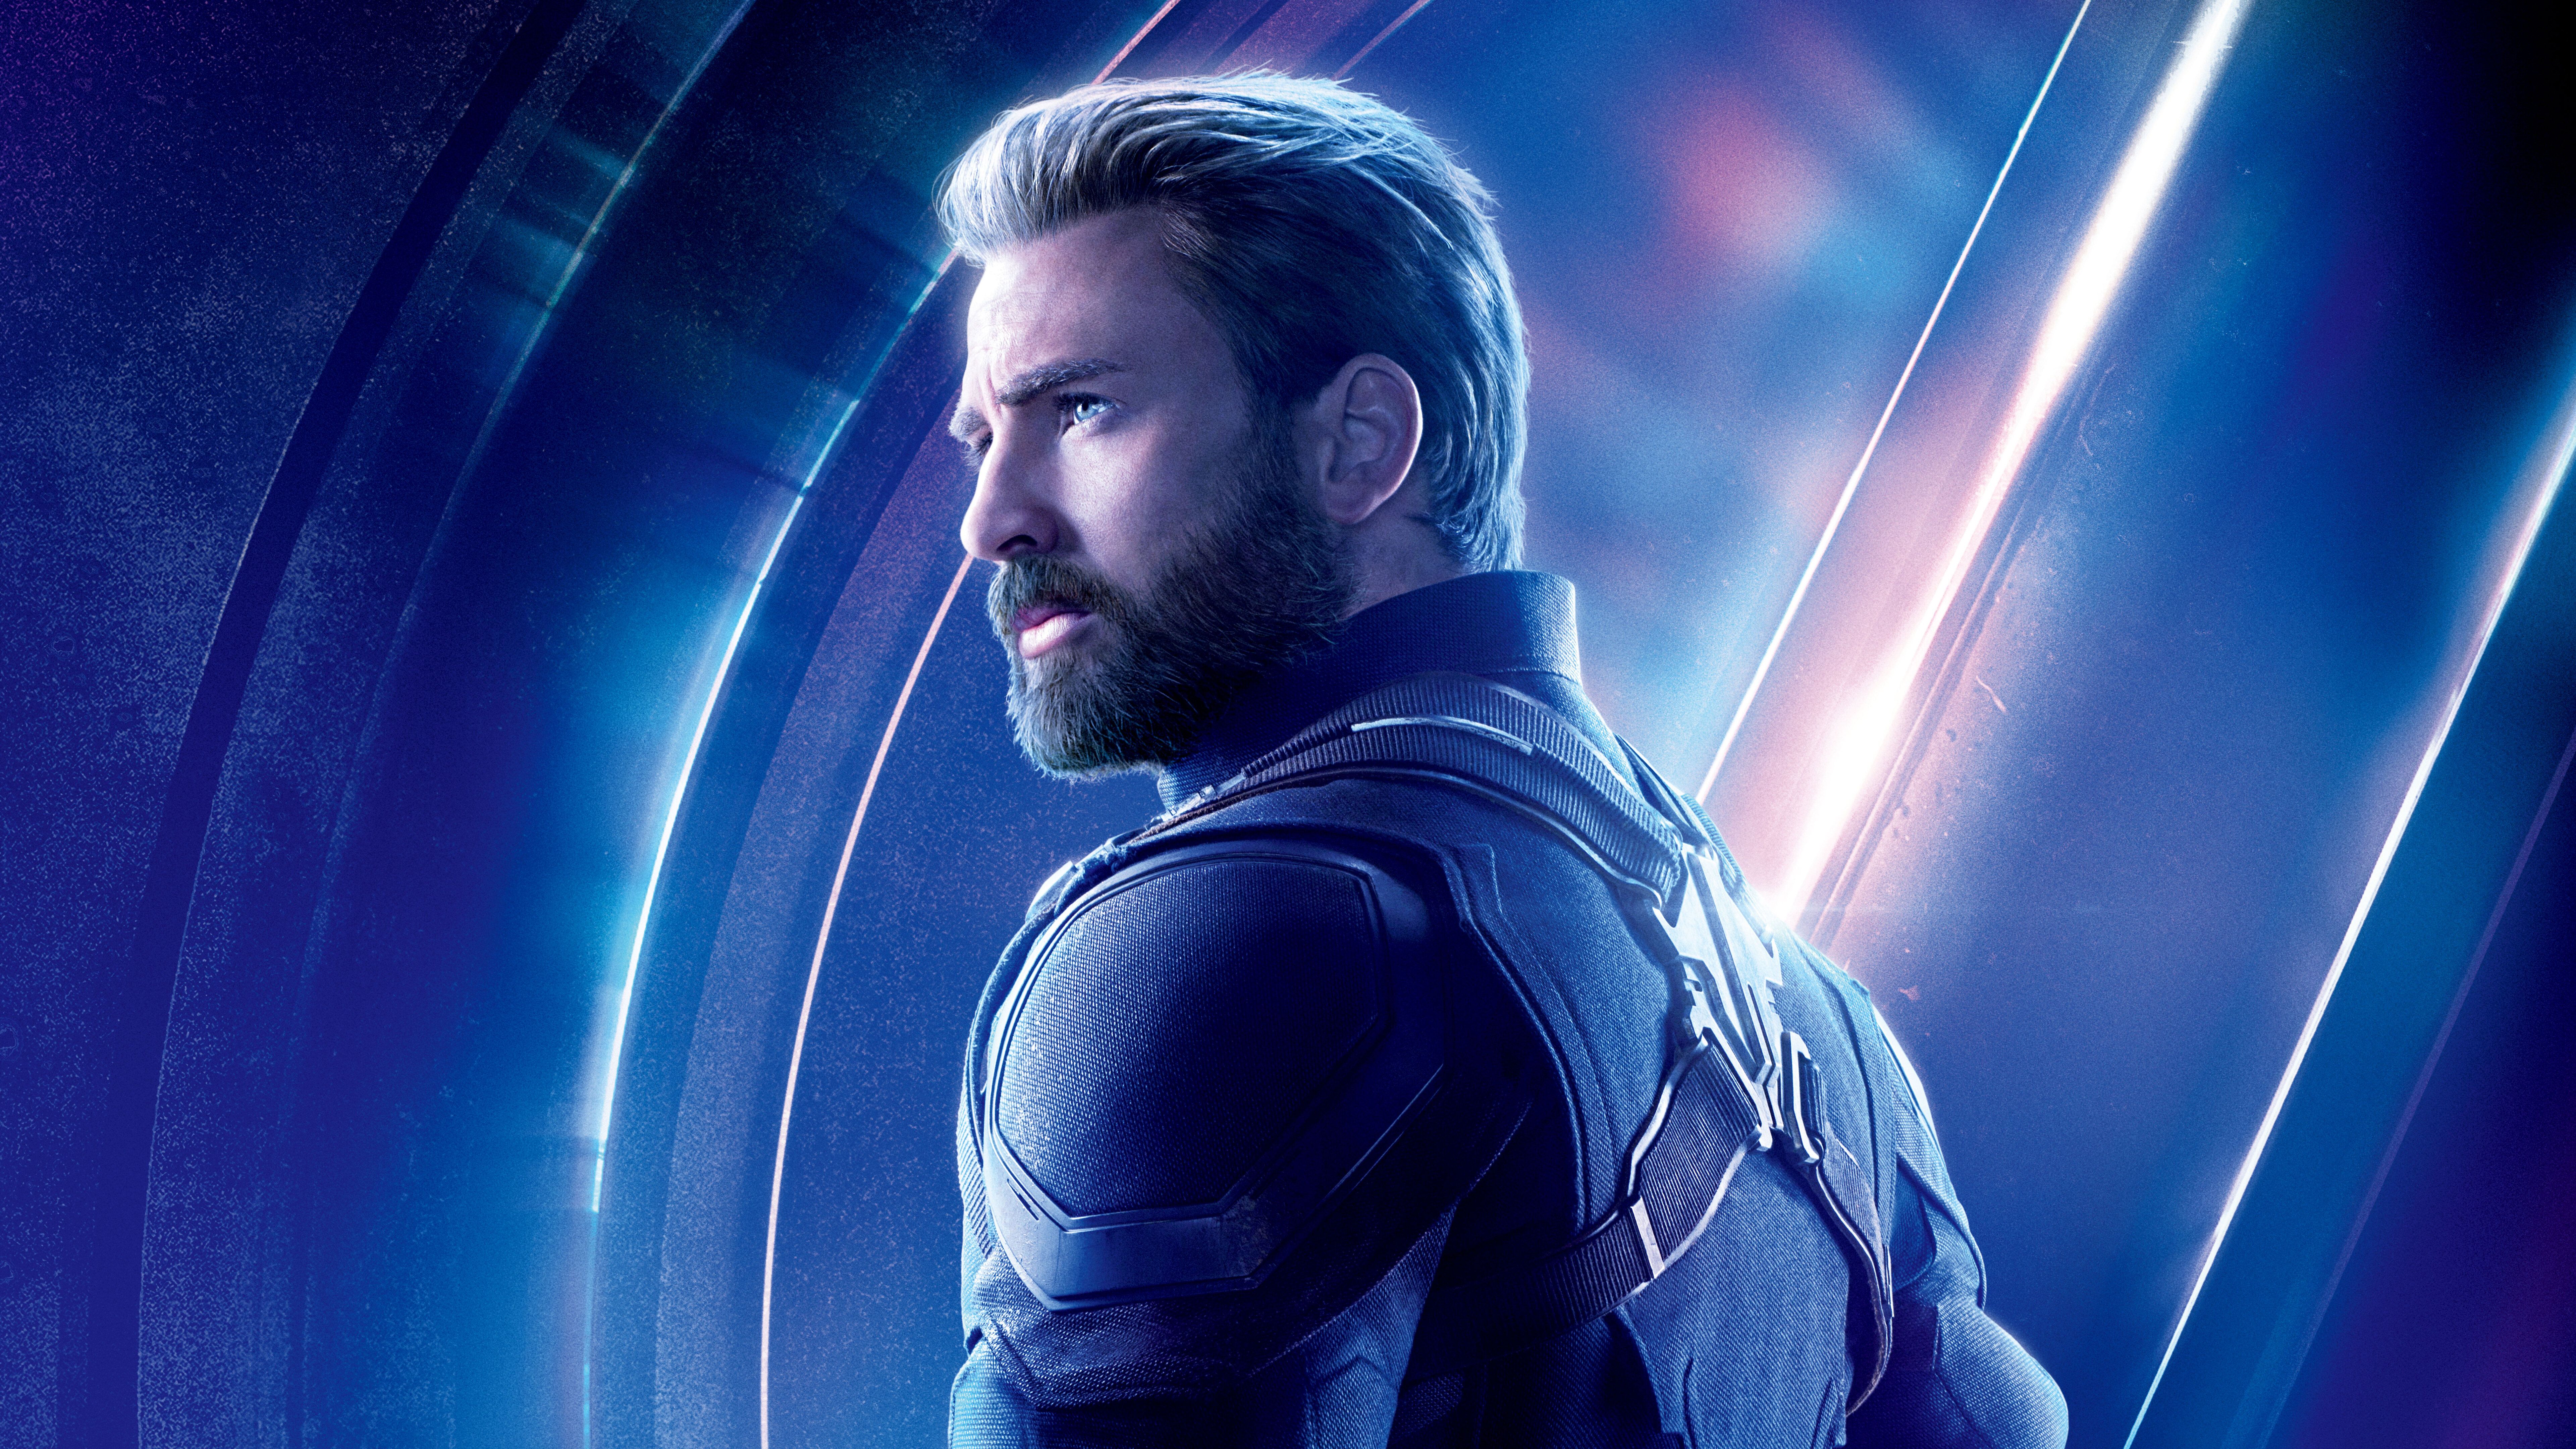 Captain America In Avengers Infinity War 8k Poster 8k HD 4k Wallpaper, Image, Background, Photo and Picture